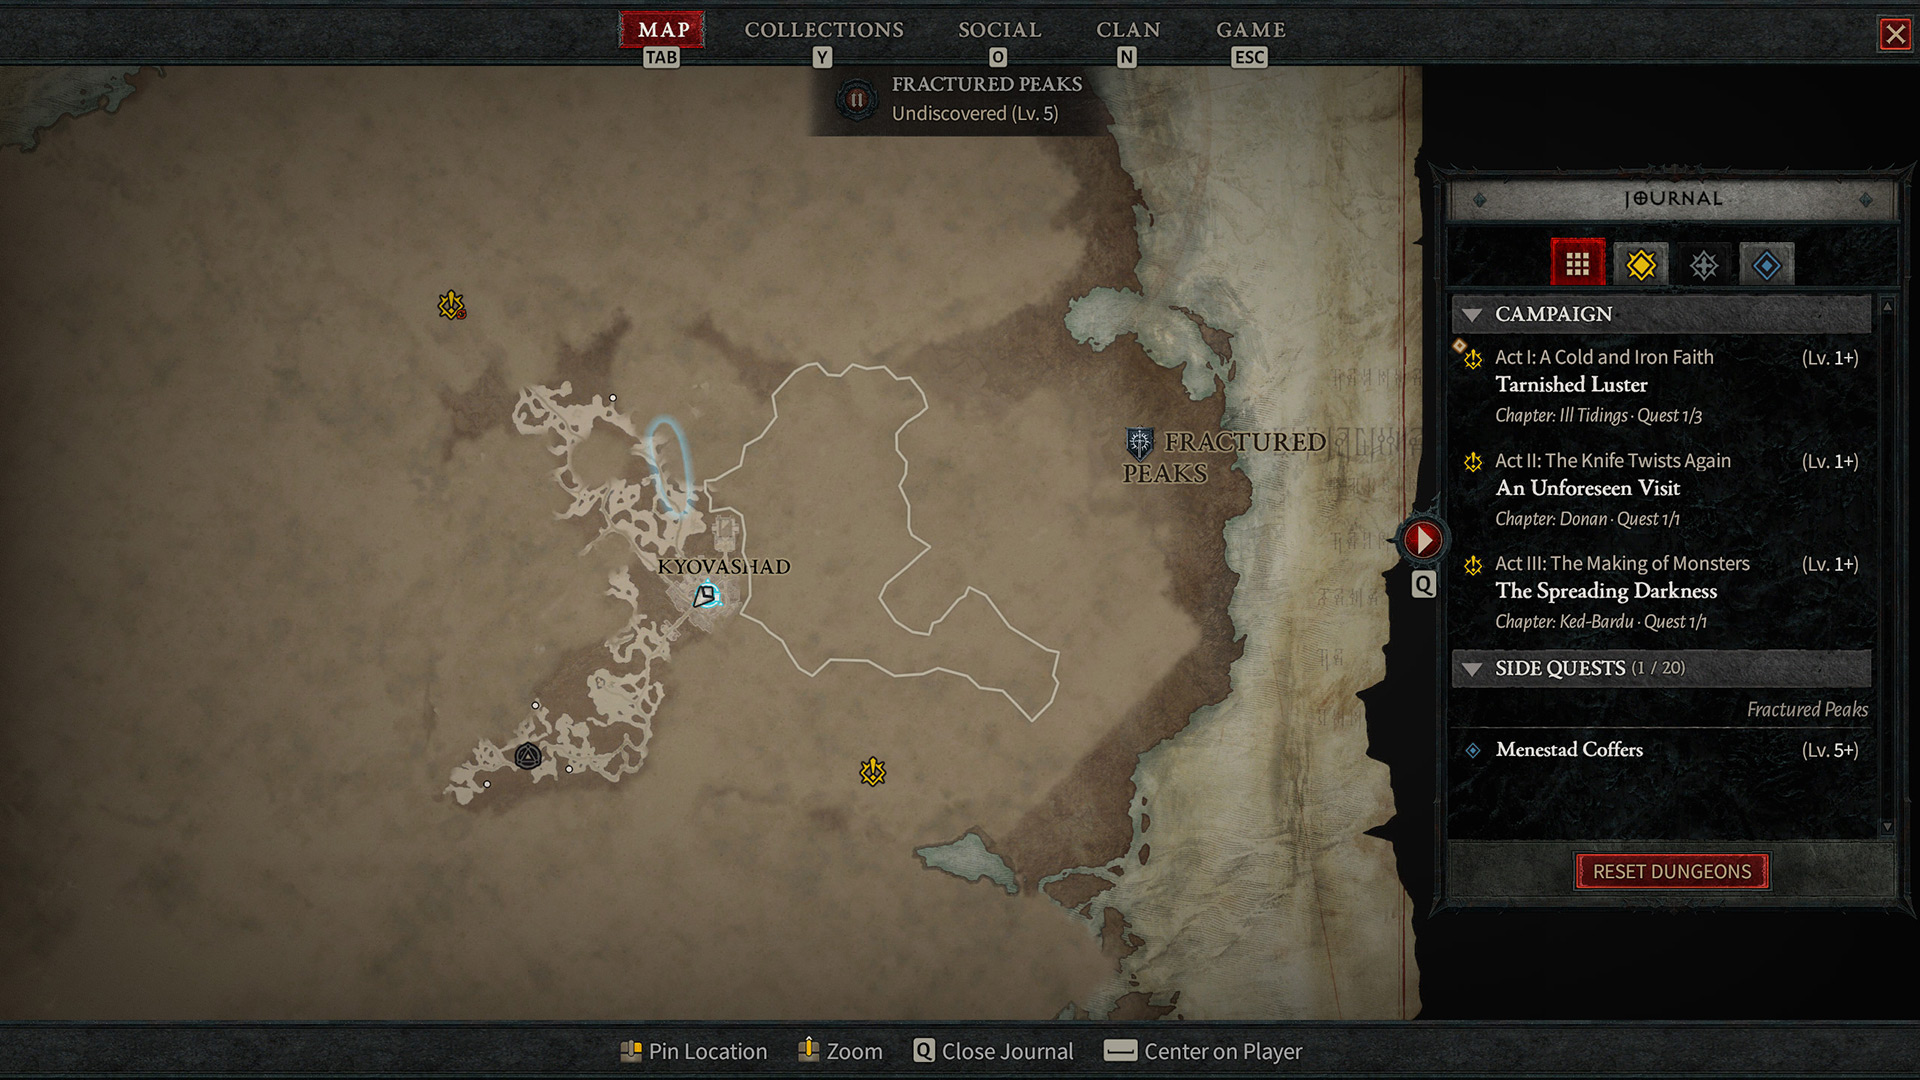 There is no map overlay planned for Diablo IV